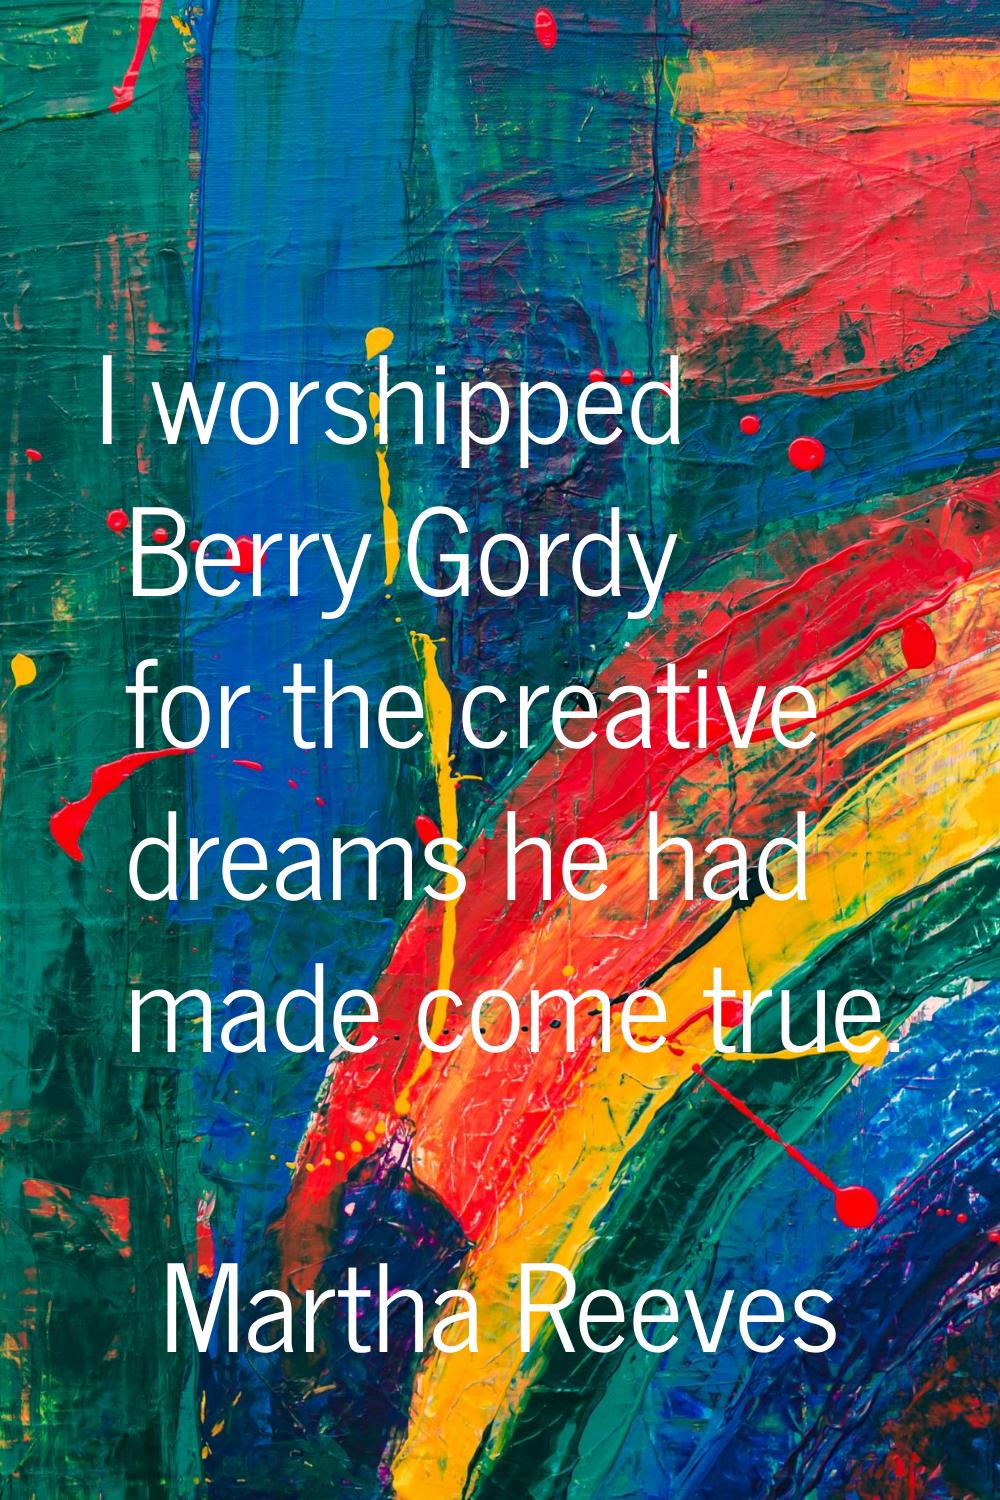 I worshipped Berry Gordy for the creative dreams he had made come true.